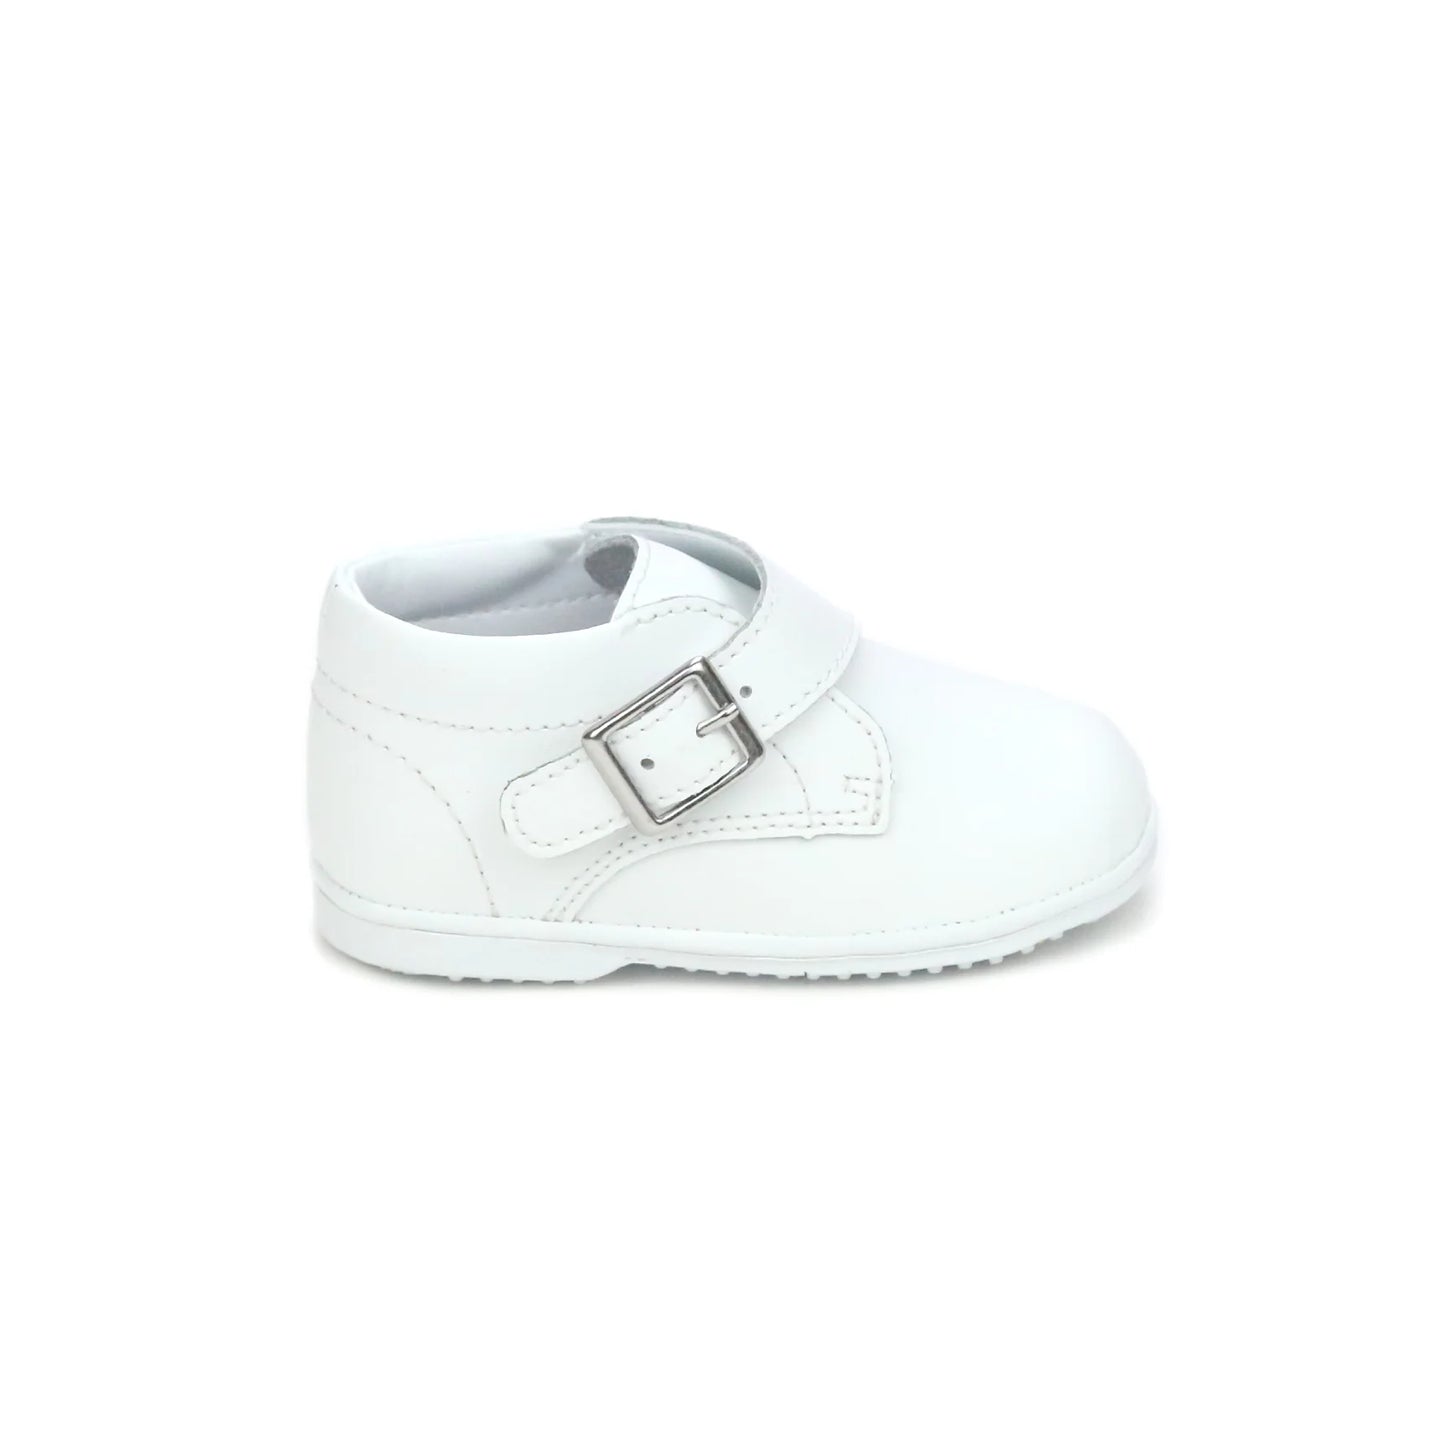 Finch Buckled Leather Boot in White  - Doodlebug's Children's Boutique